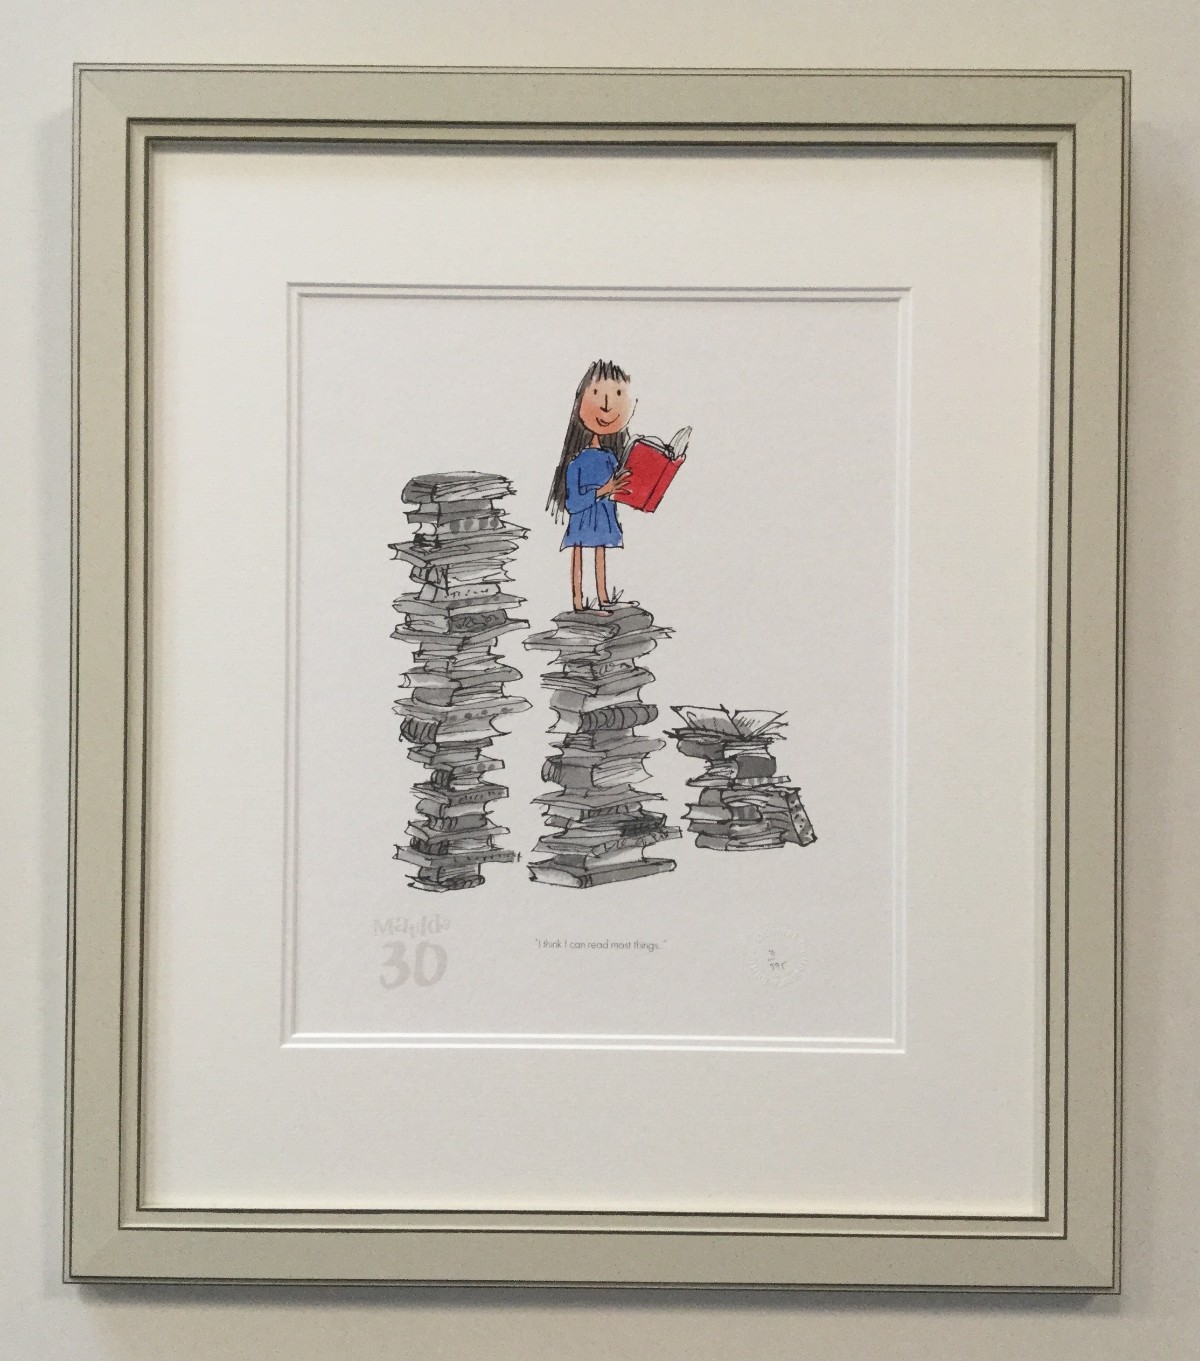 Matilda 30th - I Think I Can Read Most Things by Quentin Blake